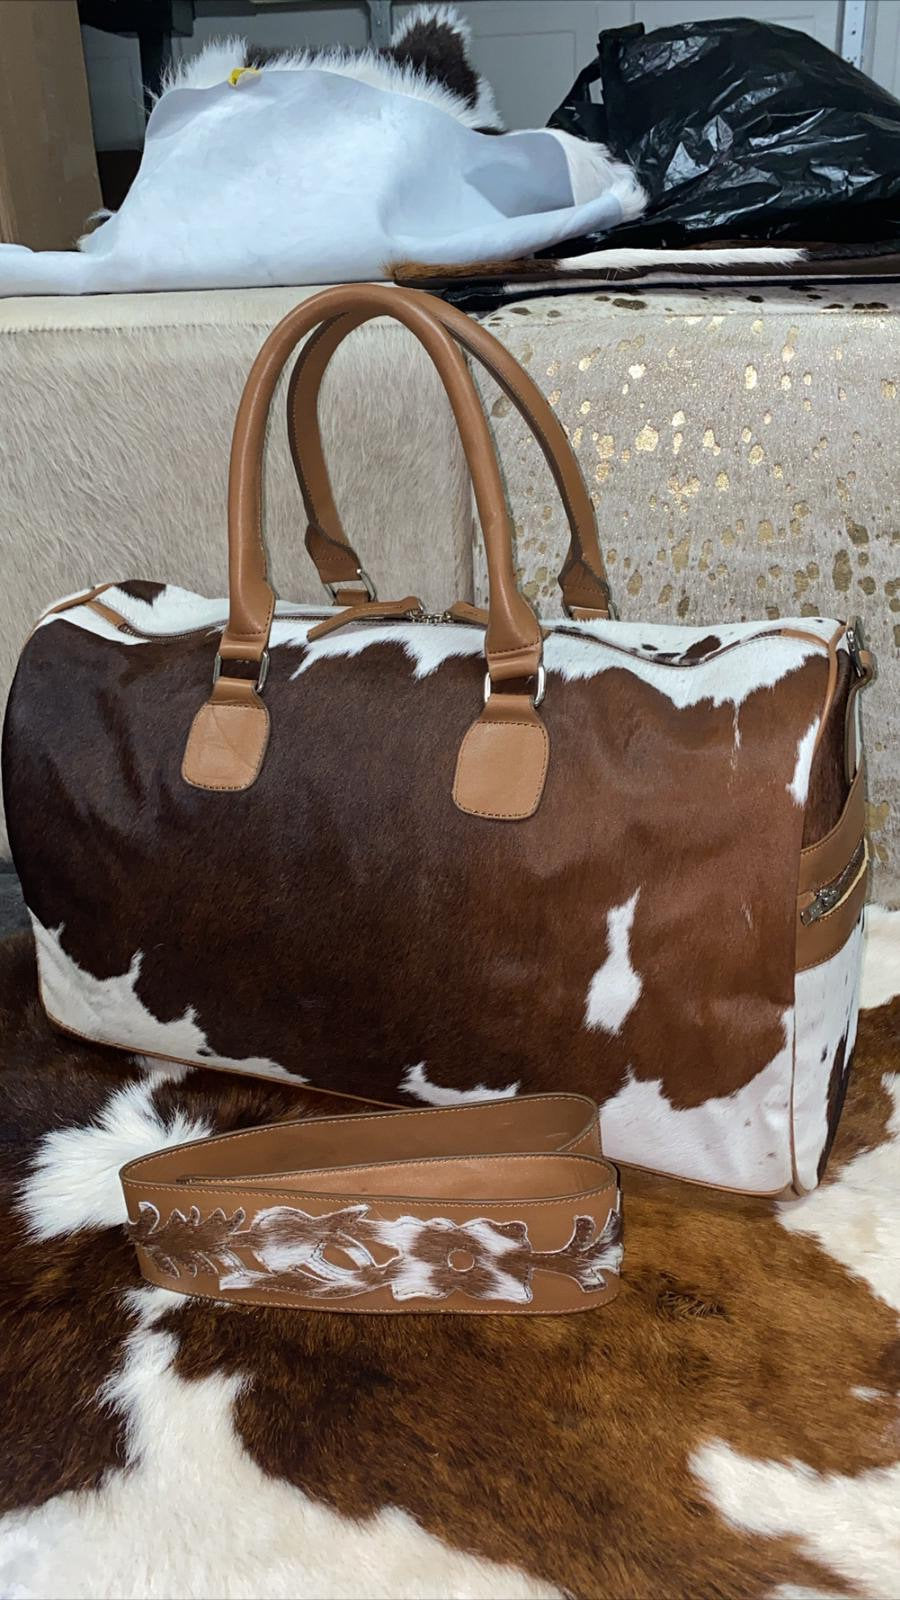 Cowhide Duffel Bag With Leather Straps Travel Bag 